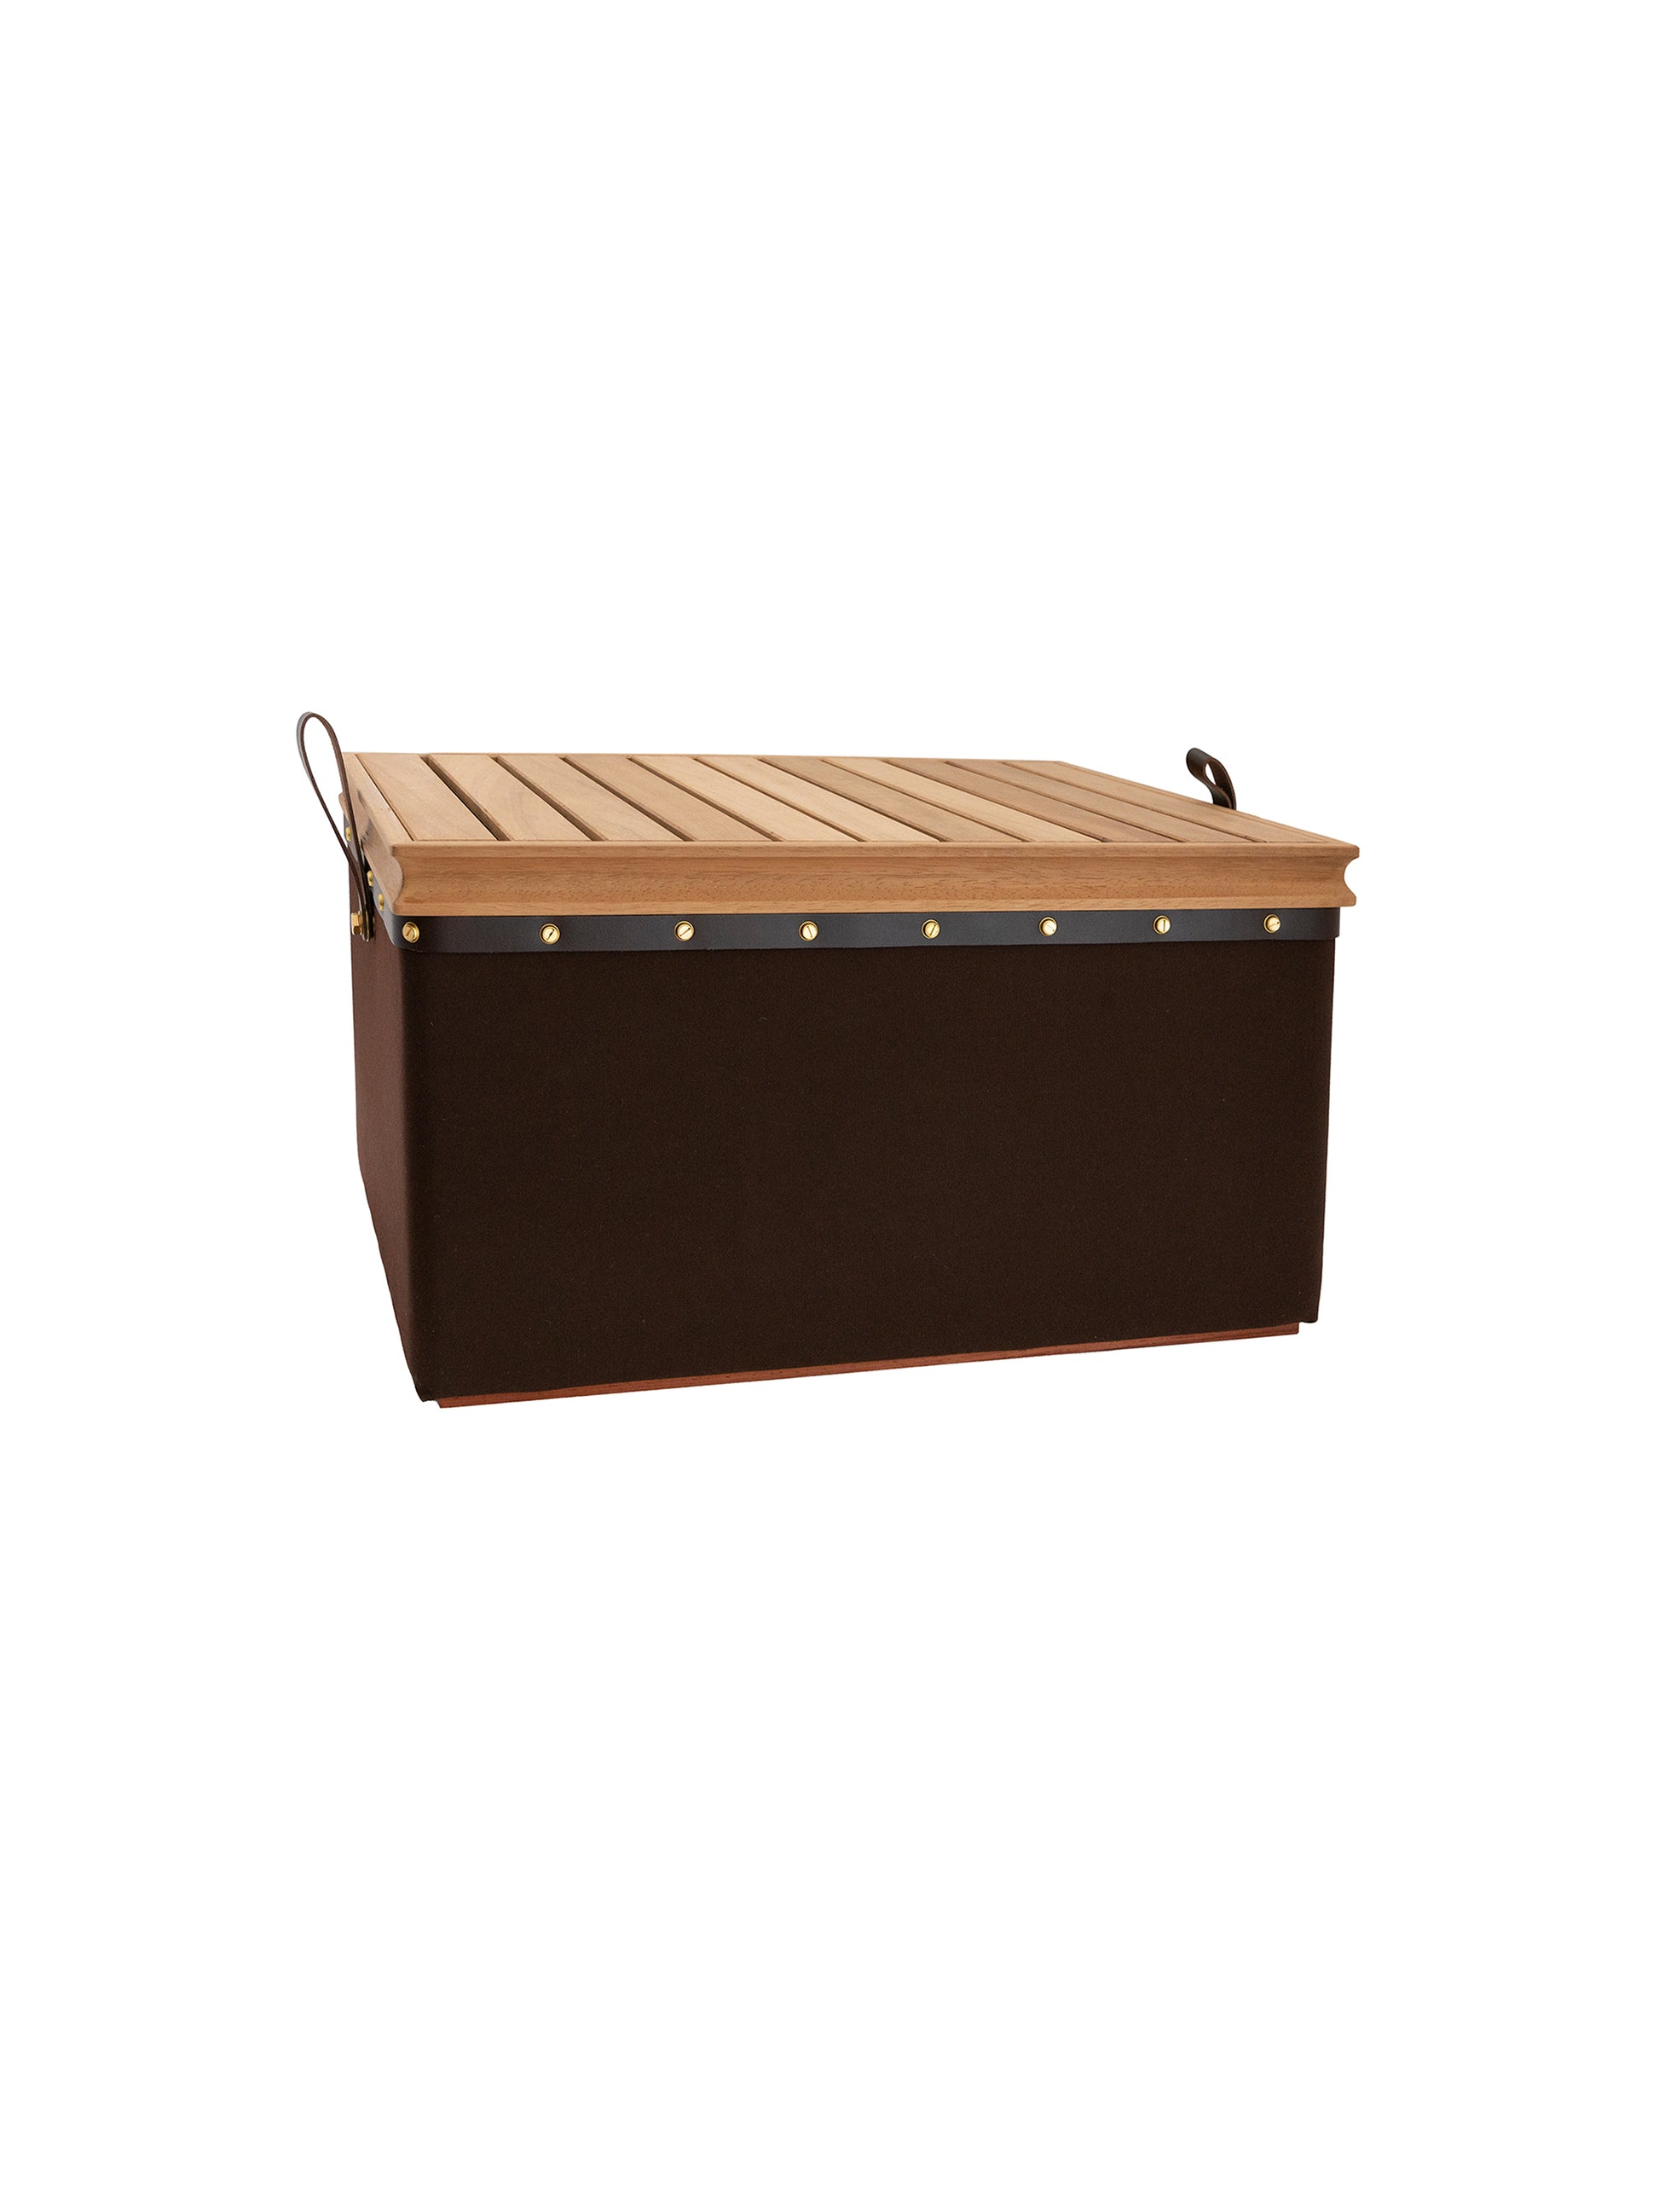 Picnic Cooler Chocolate Weston Table